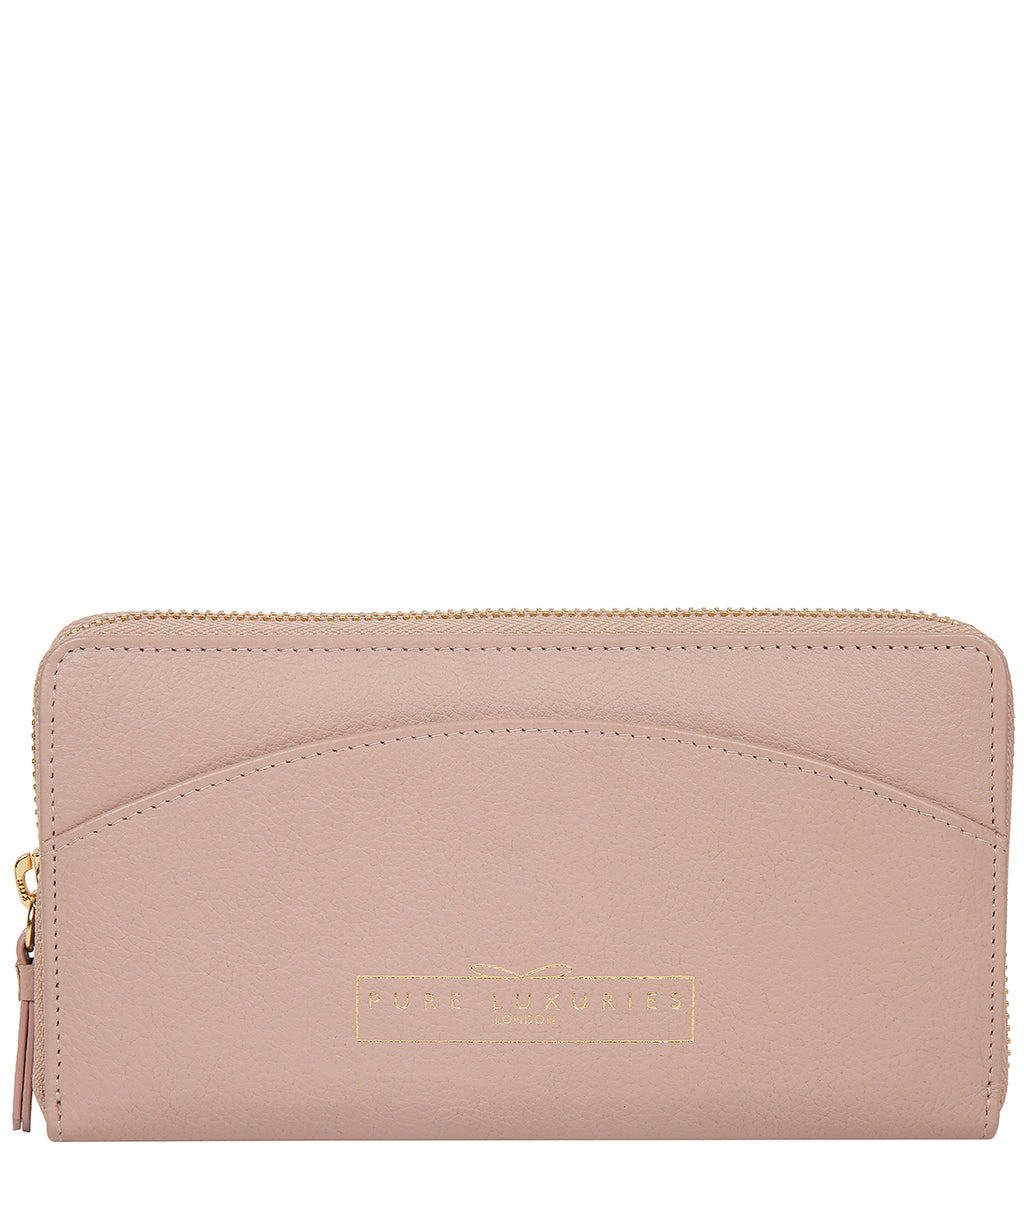 Pink Leather Purse 'Jenika' by Pure Luxuries – Pure Luxuries London